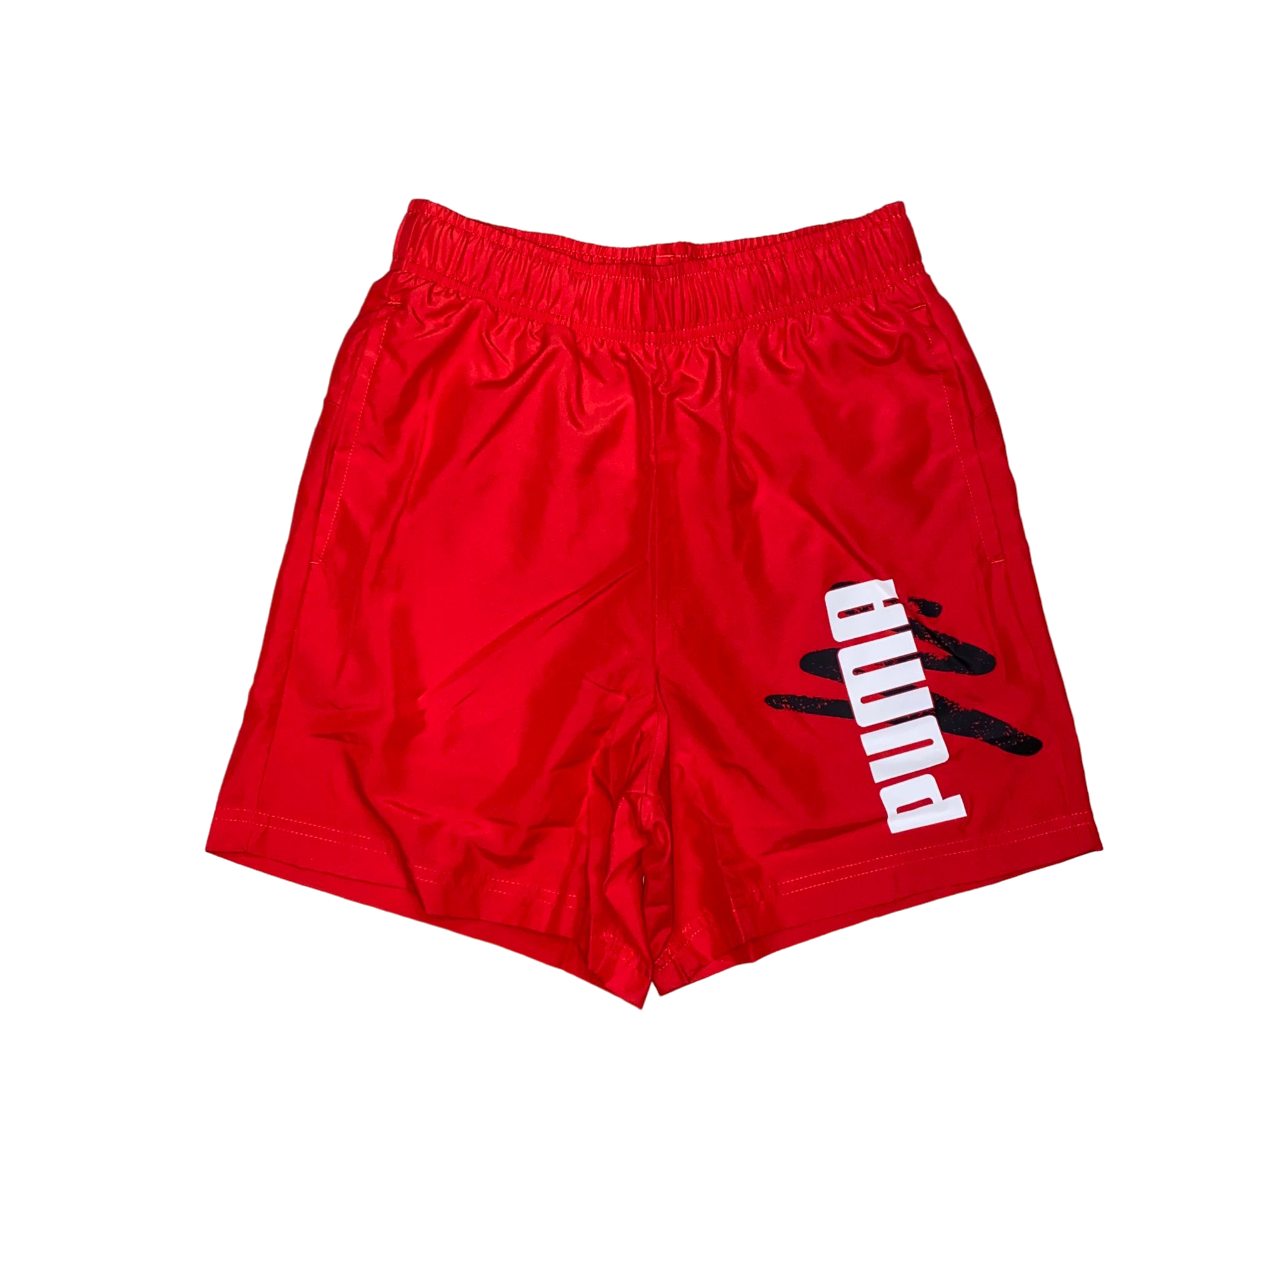 Puma sports shorts swimsuit Boxer swimsuit for men 678990 11 red